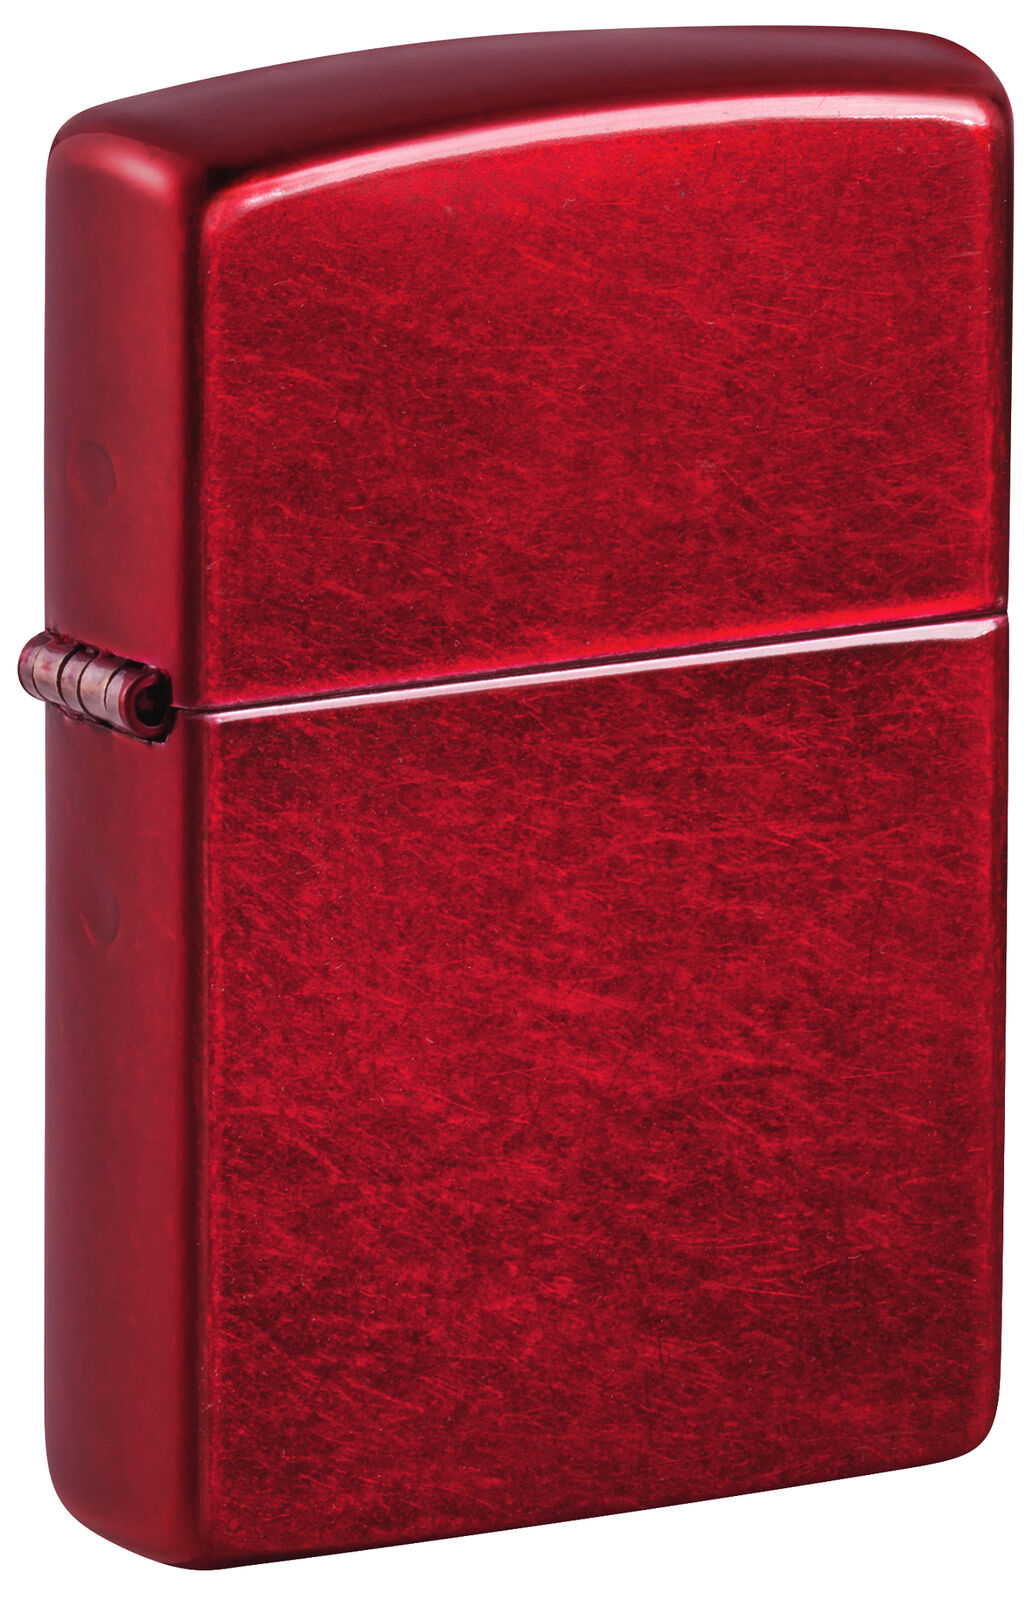 Zippo Classic Candy Apple Red Windproof Pocket Lighter, 21063